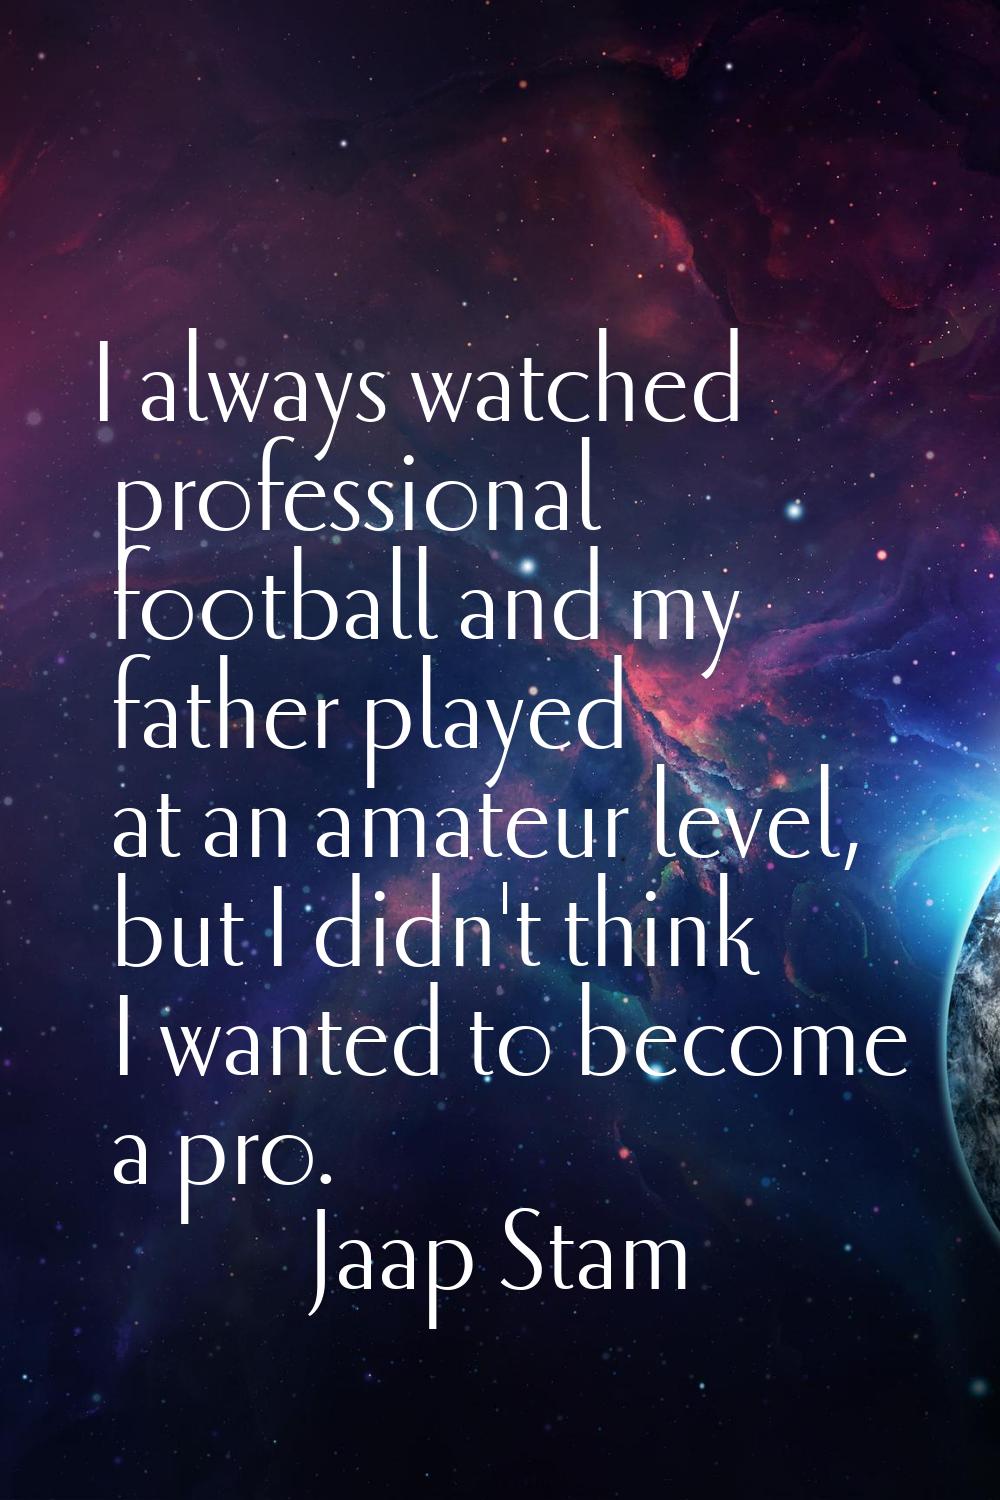 I always watched professional football and my father played at an amateur level, but I didn't think